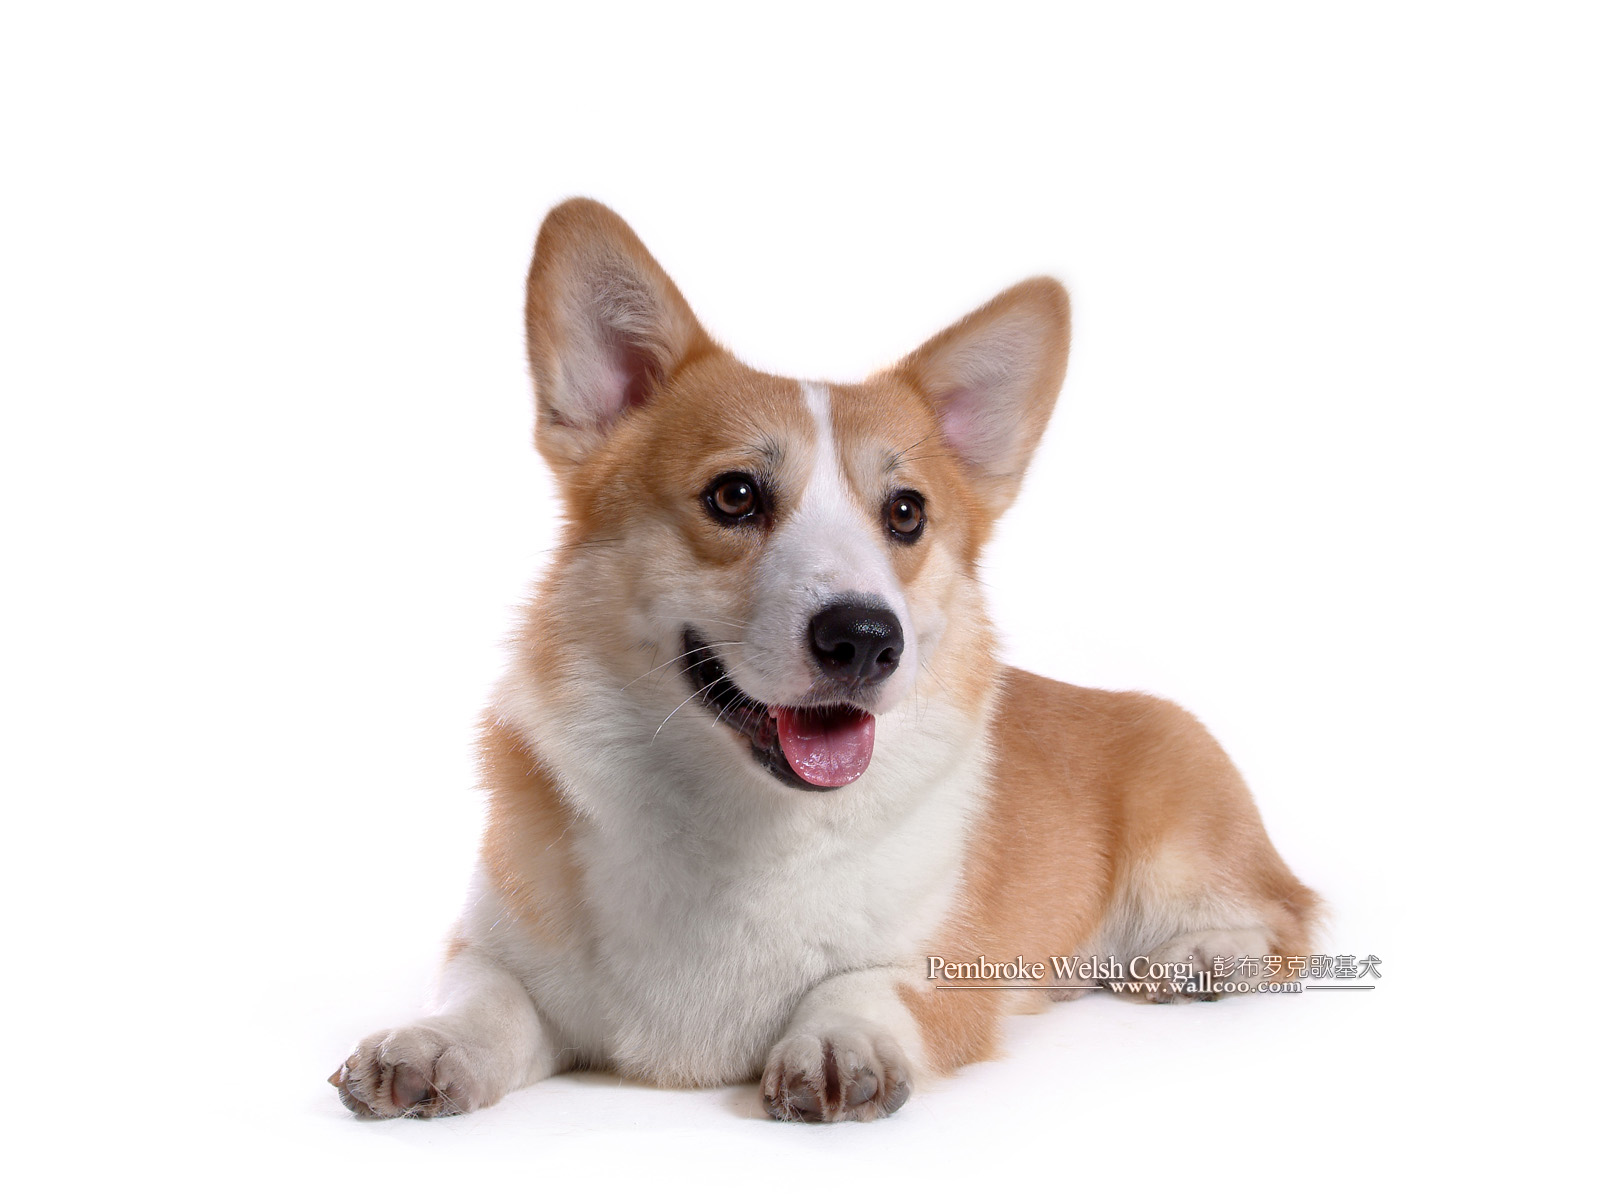 Pembroke Welsh Corgi Dogs And Puppies